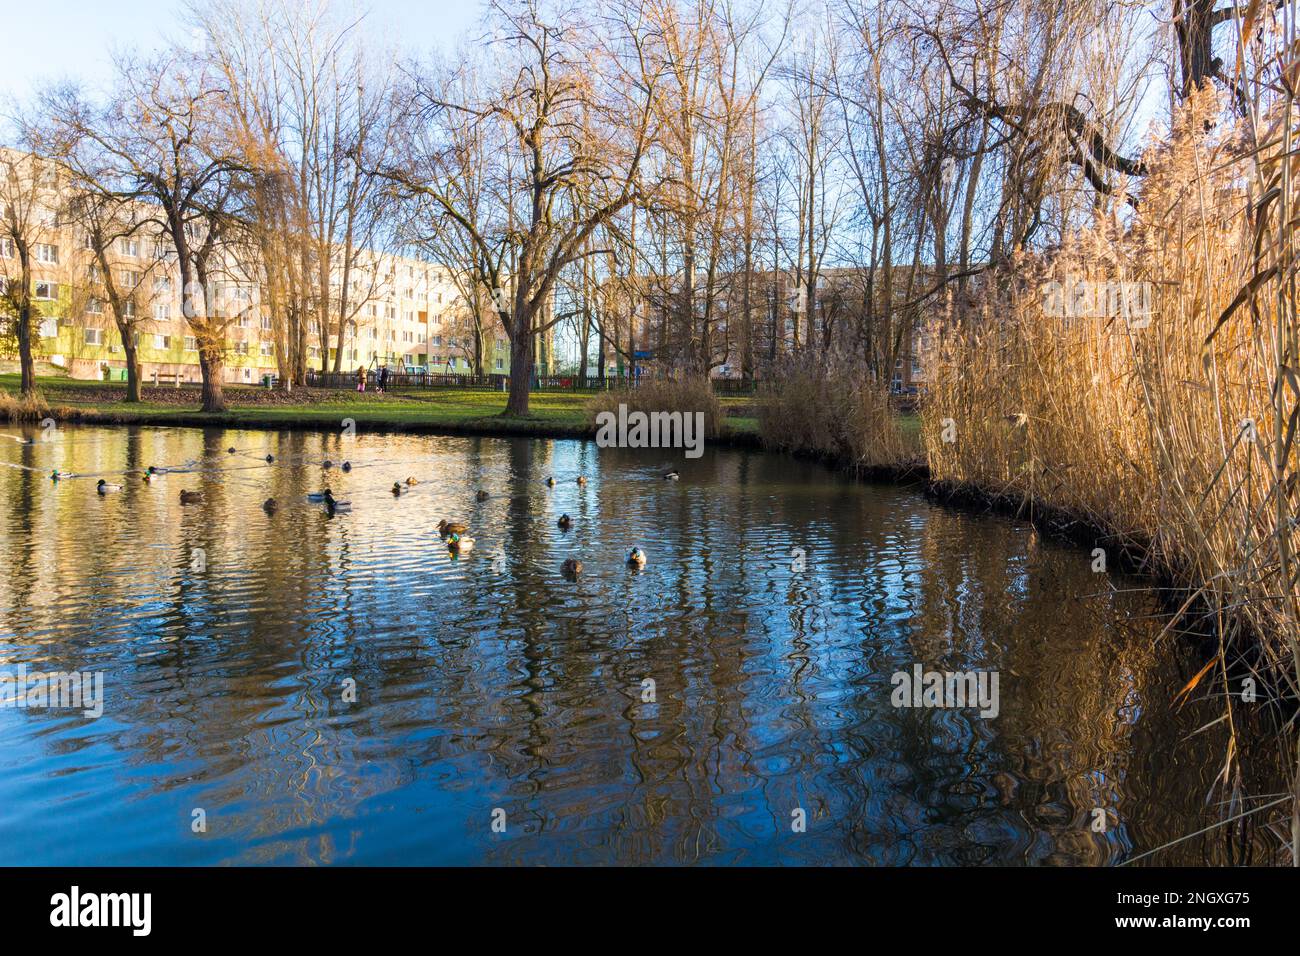 Lakeside in winter with reeds in residential district called 'Jerevan lakotelep', Sopron, Hungary Stock Photo